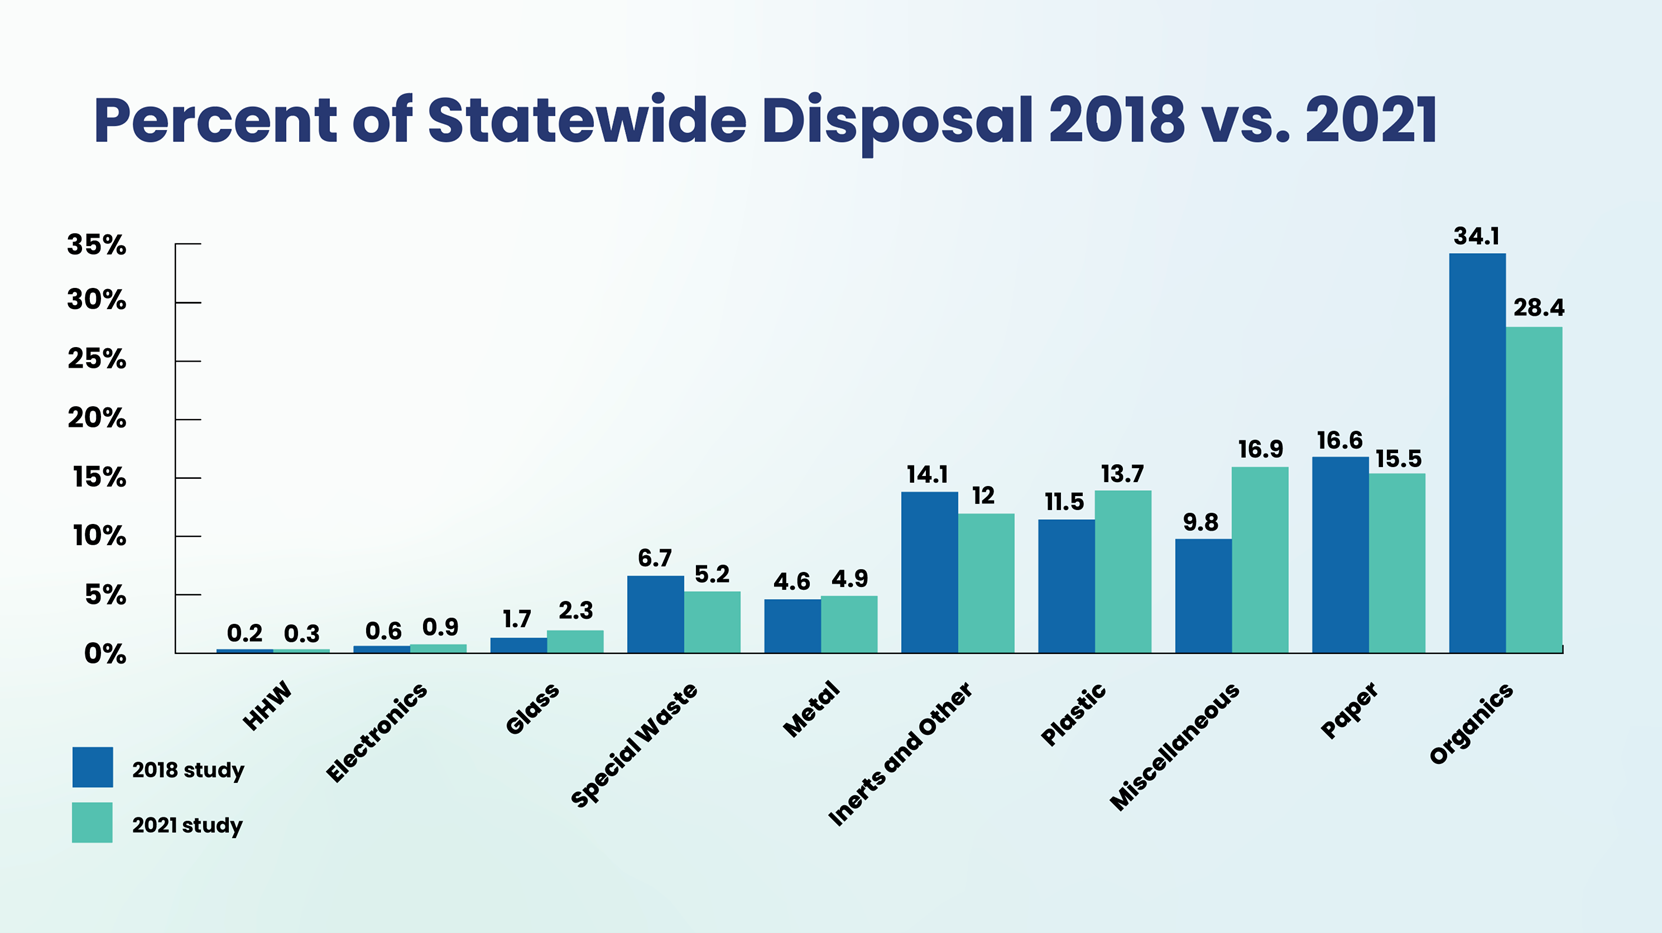 Percent of Statewide Disposal 2018 versus 2021